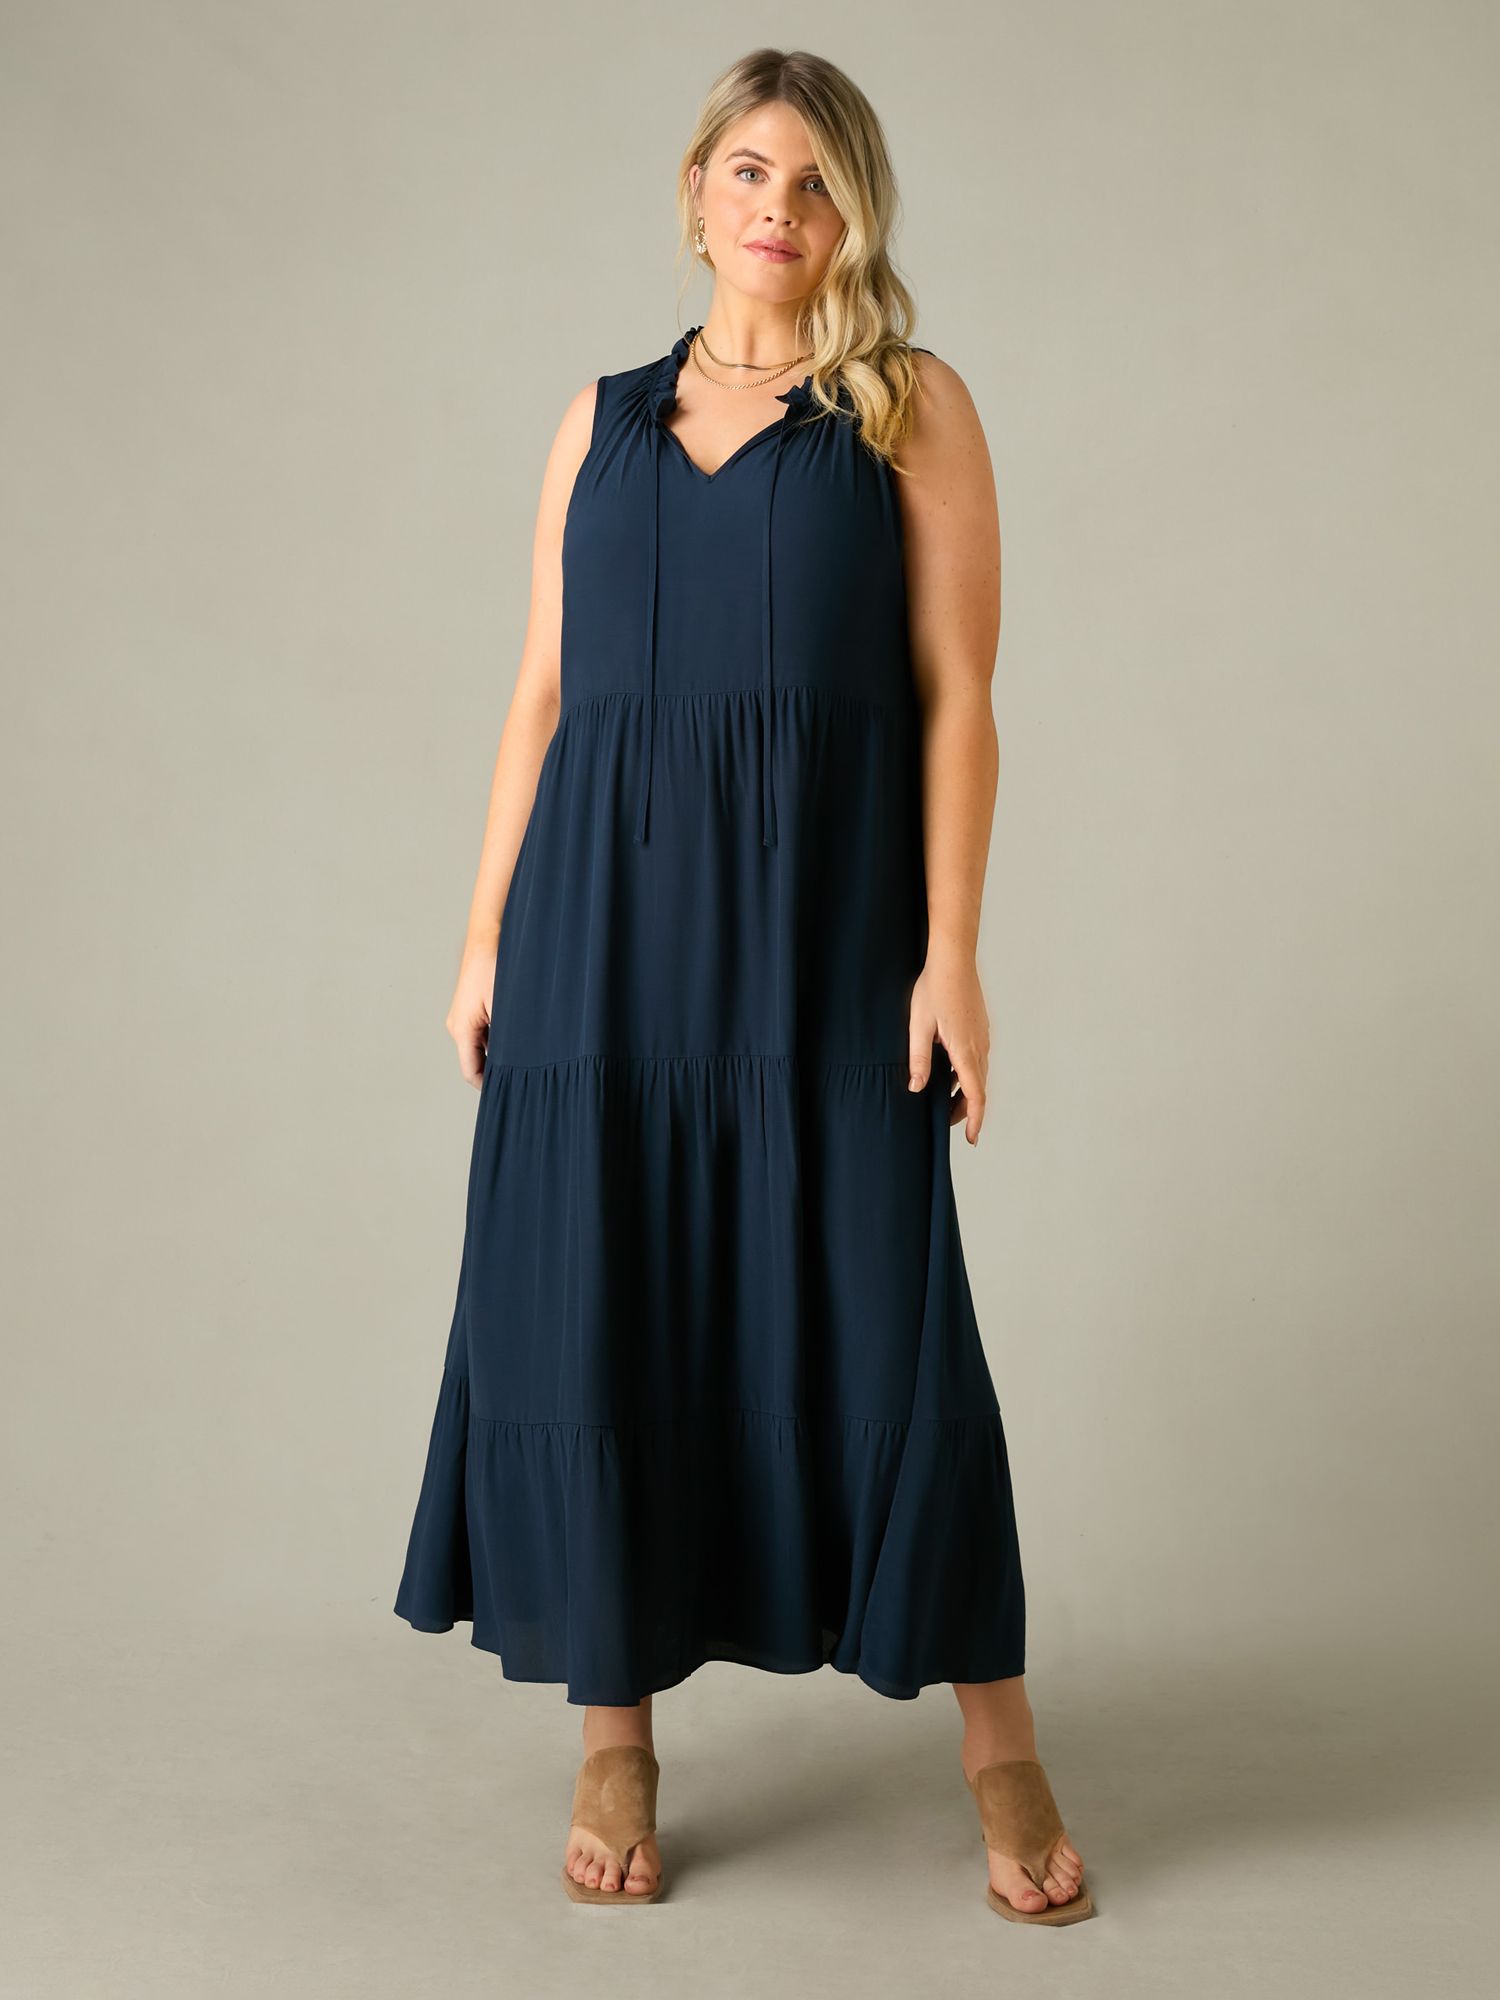 Live Unlimited Curve Ruffle Neck Tiered Maxi Dress, Navy, 22